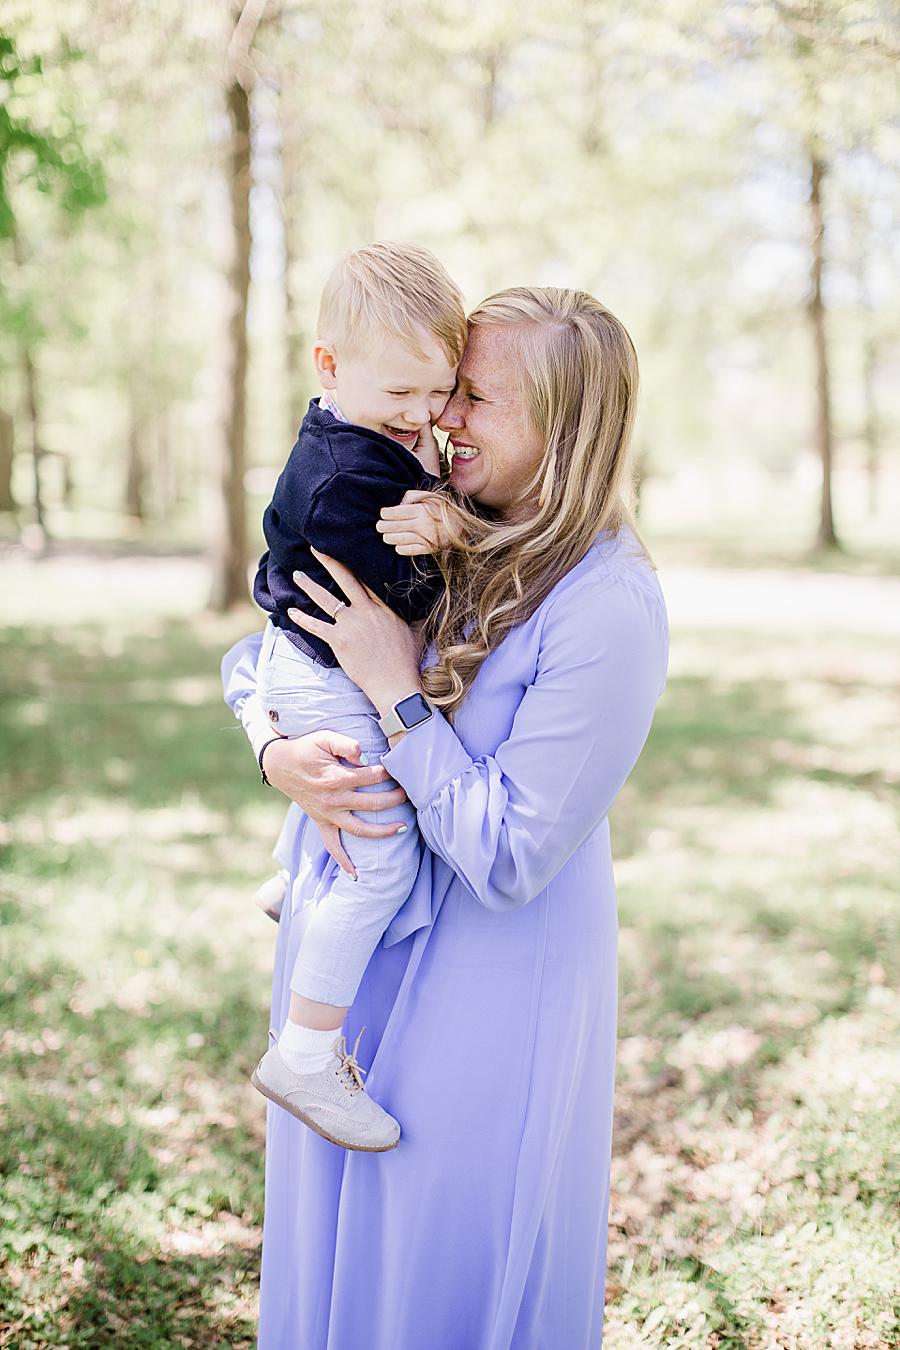 Purple maternity dress at this Easter 2019 by Knoxville Wedding Photographer, Amanda May Photos.